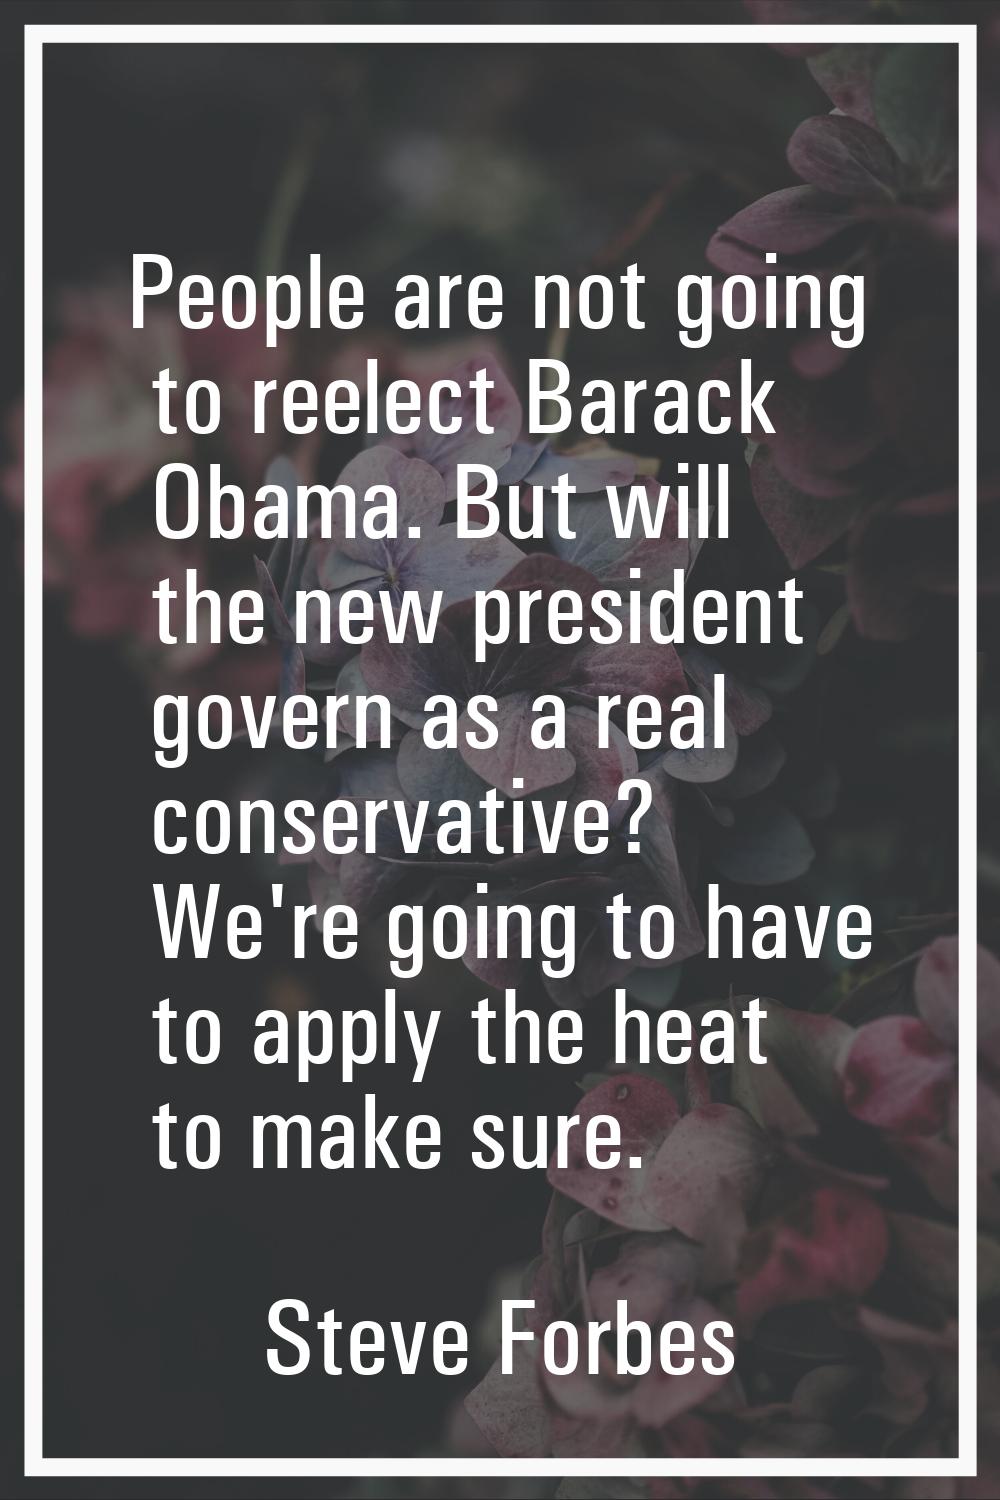 People are not going to reelect Barack Obama. But will the new president govern as a real conservat